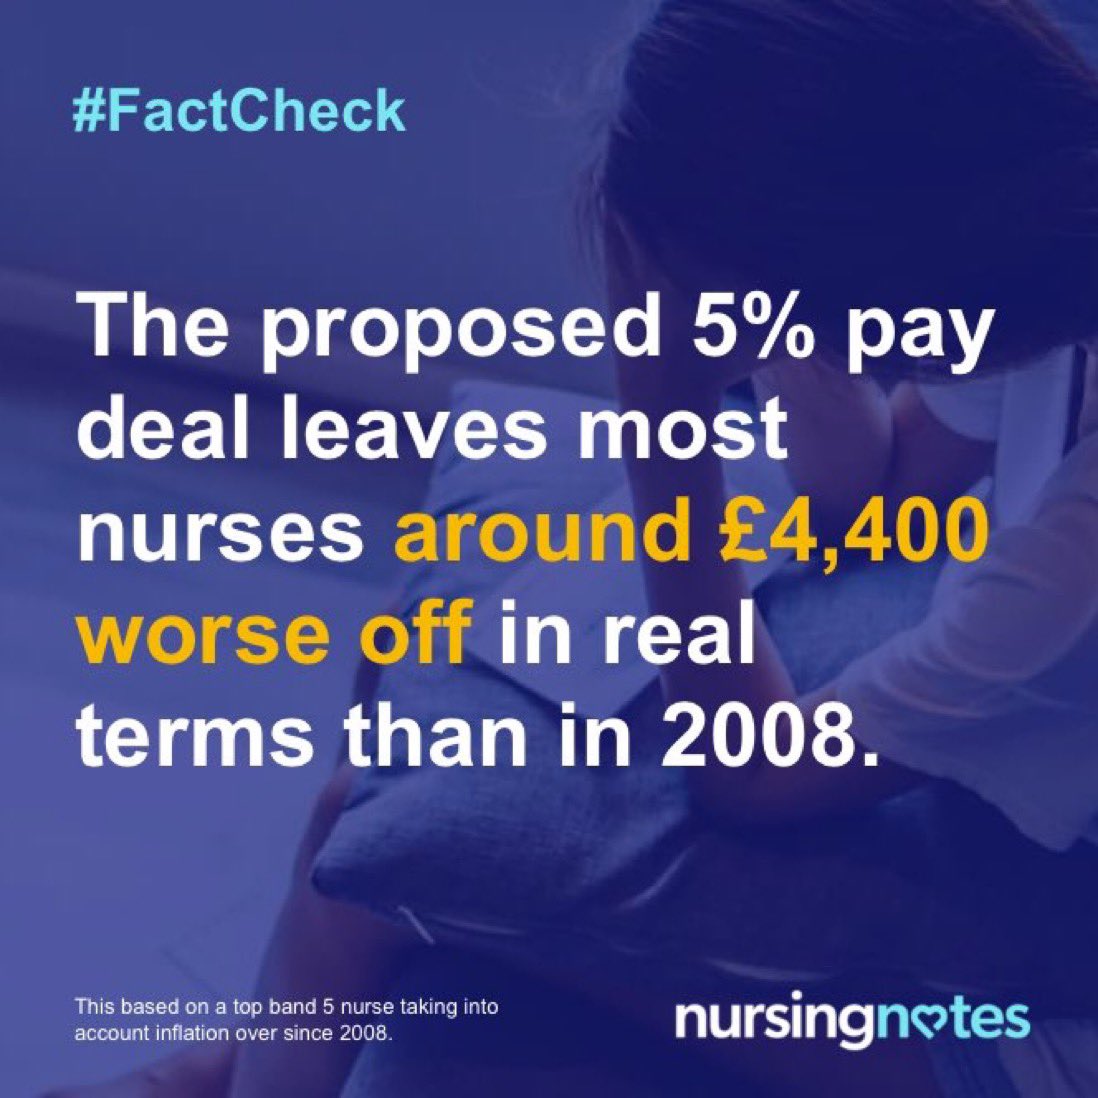 5% won’t improve retention

5% won’t increase recruitment

5% leaves most nurses (and many other staff) around £4,400 worse off in real terms than in 2008

The Government need to do so much better for an NHS in crisis

#VoteForStrike